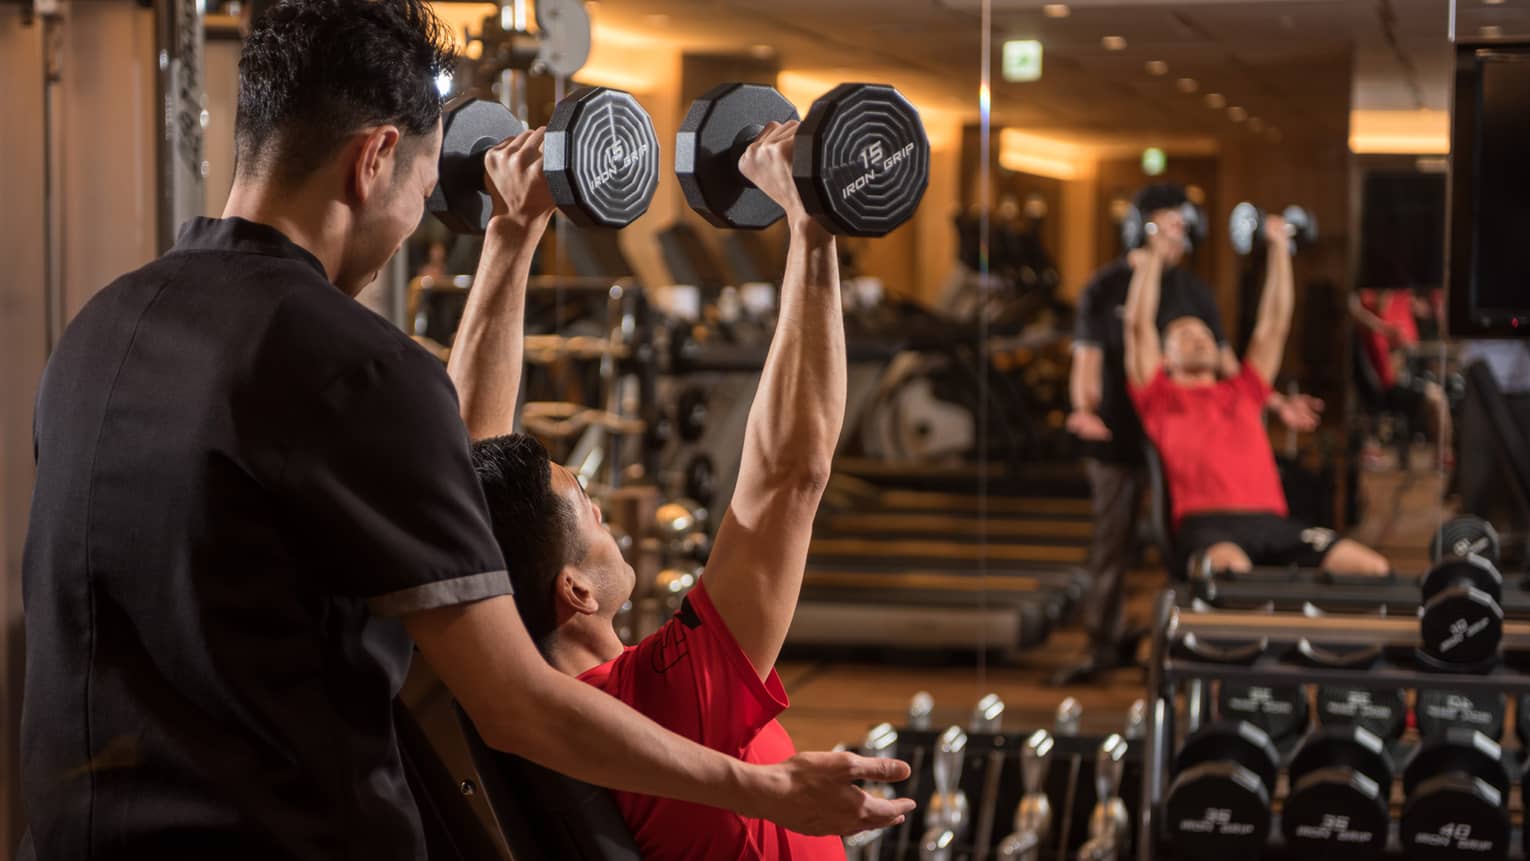 Man in chair in front of mirror lifts two 15 lb. weights above his head while personal trainer assists